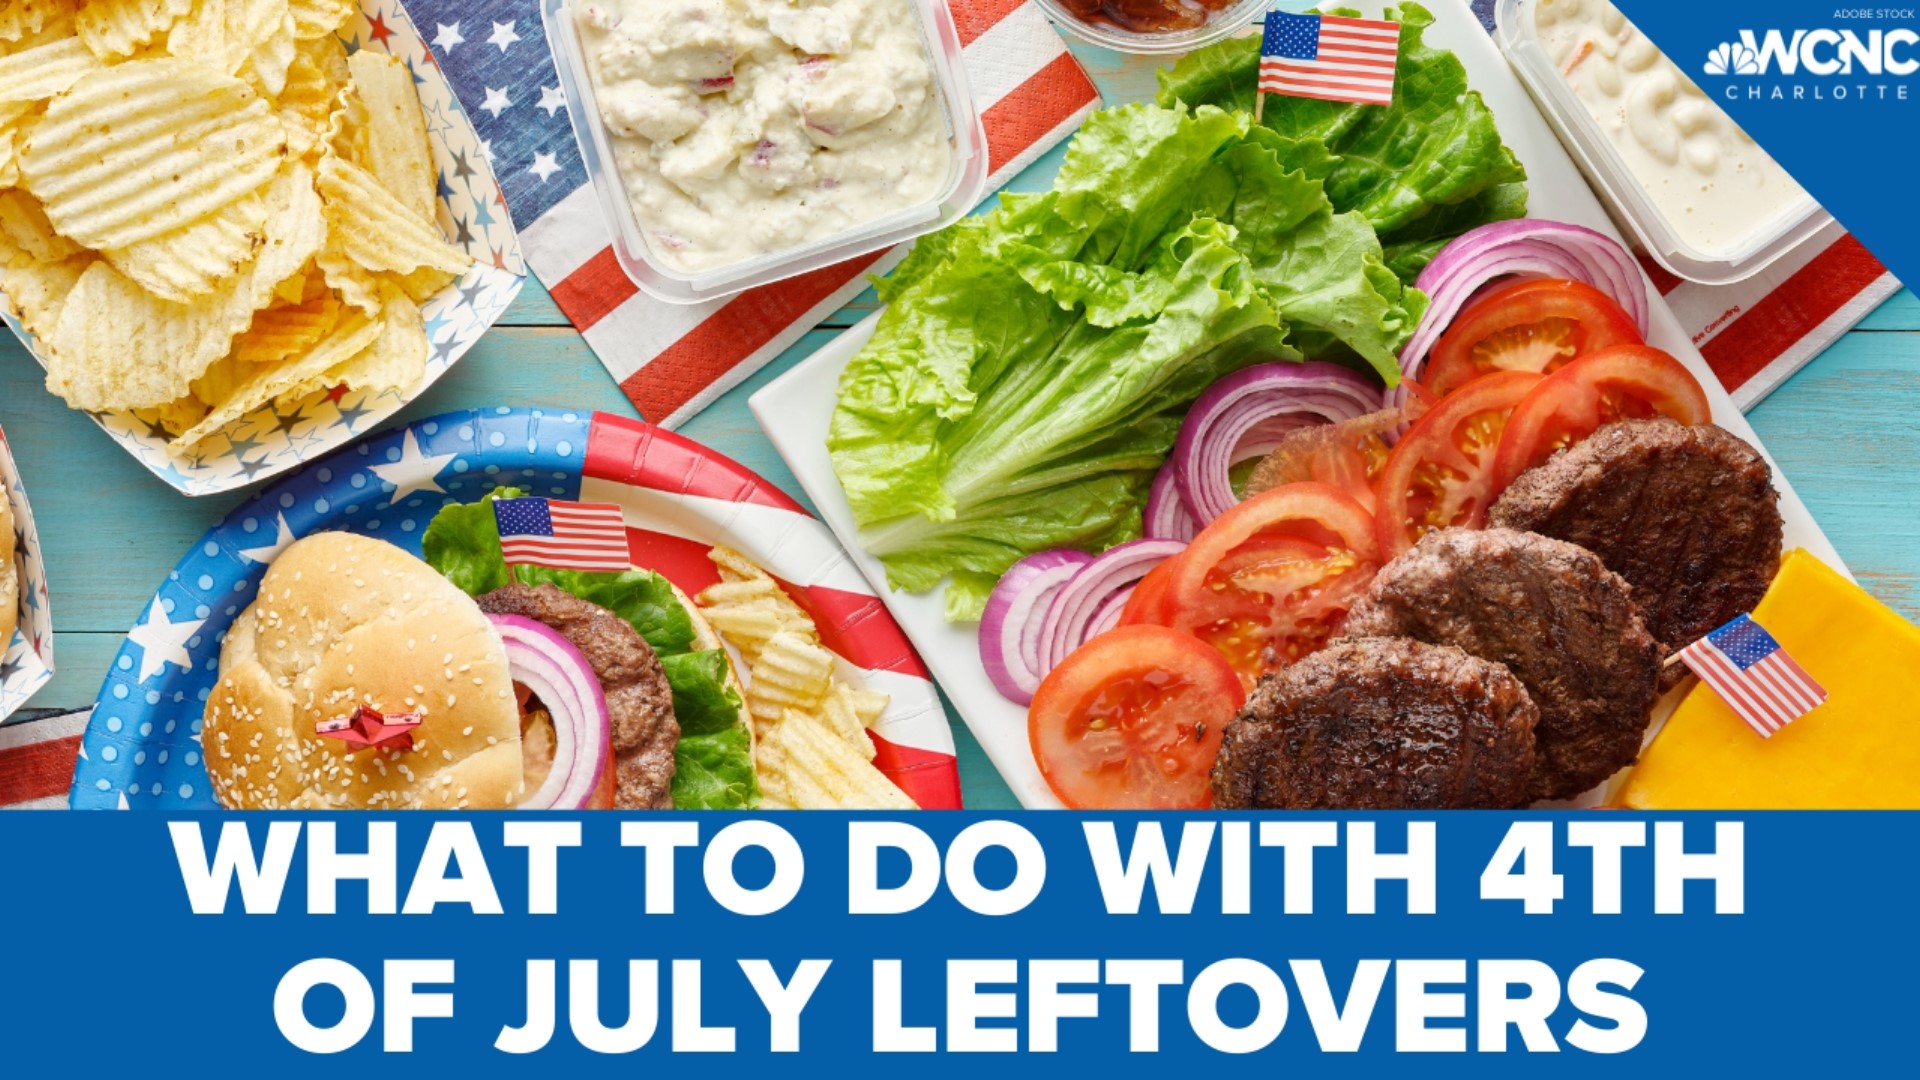 How Long Are Leftovers Good For?